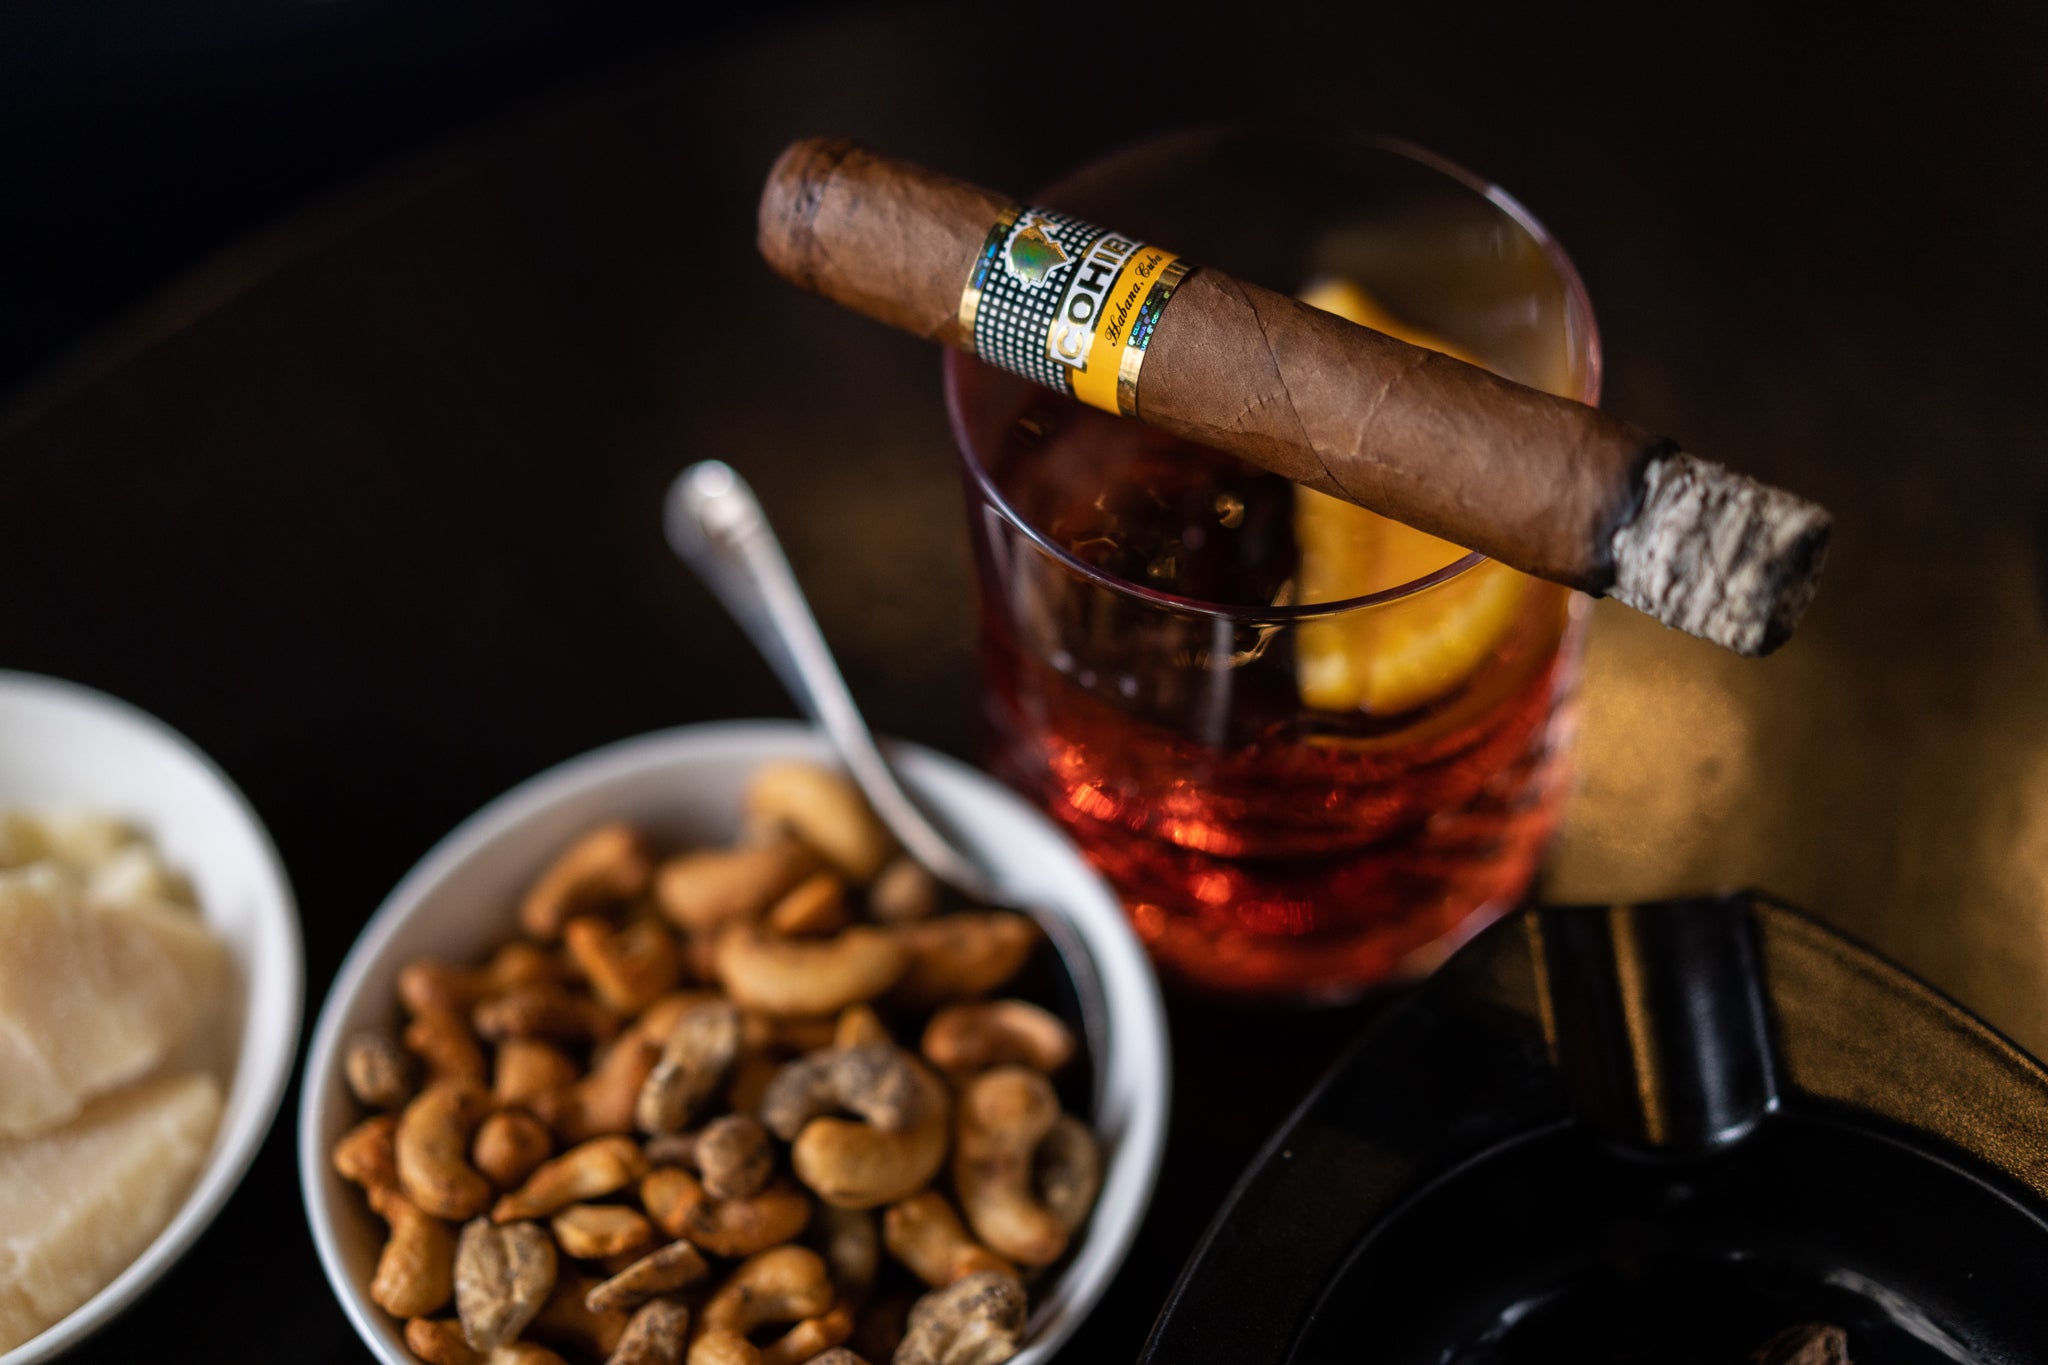 The Siglo VI is described as one of Cohiba's best ever cigars